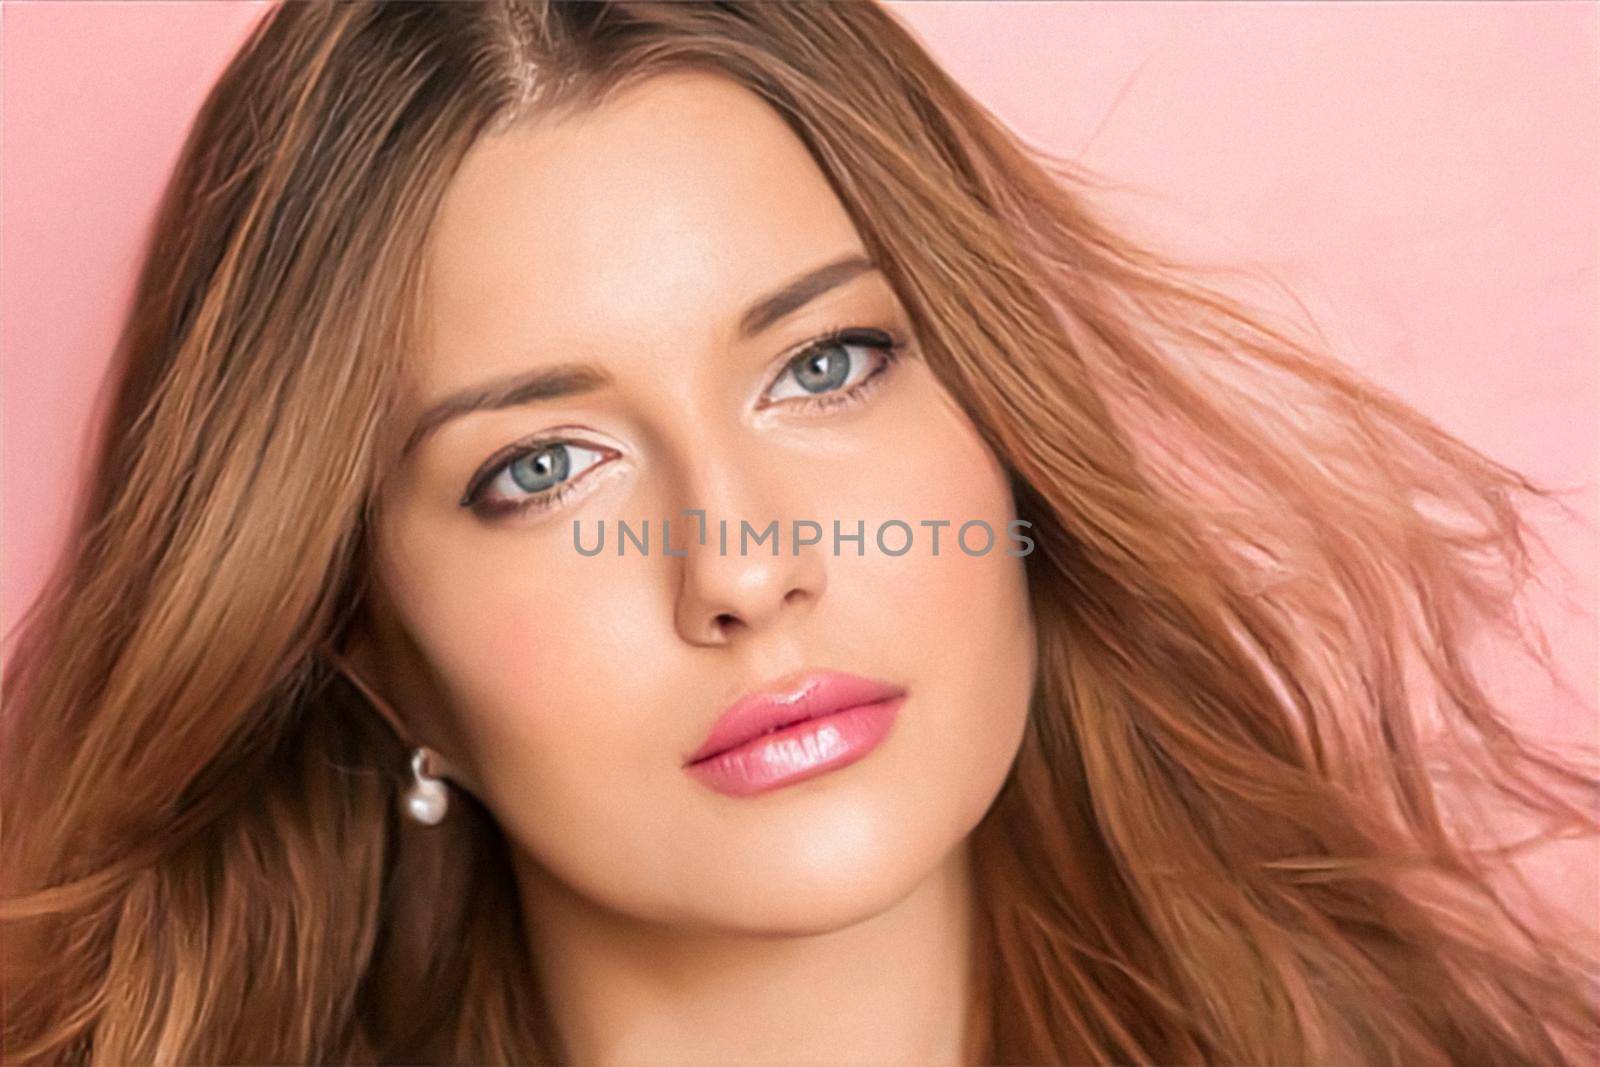 Beauty face portrait, beautiful woman with long hairstyle and glossy lipstick make-up on pink background, fashion and glamour model look for makeup, skincare cosmetics and hair care commercial